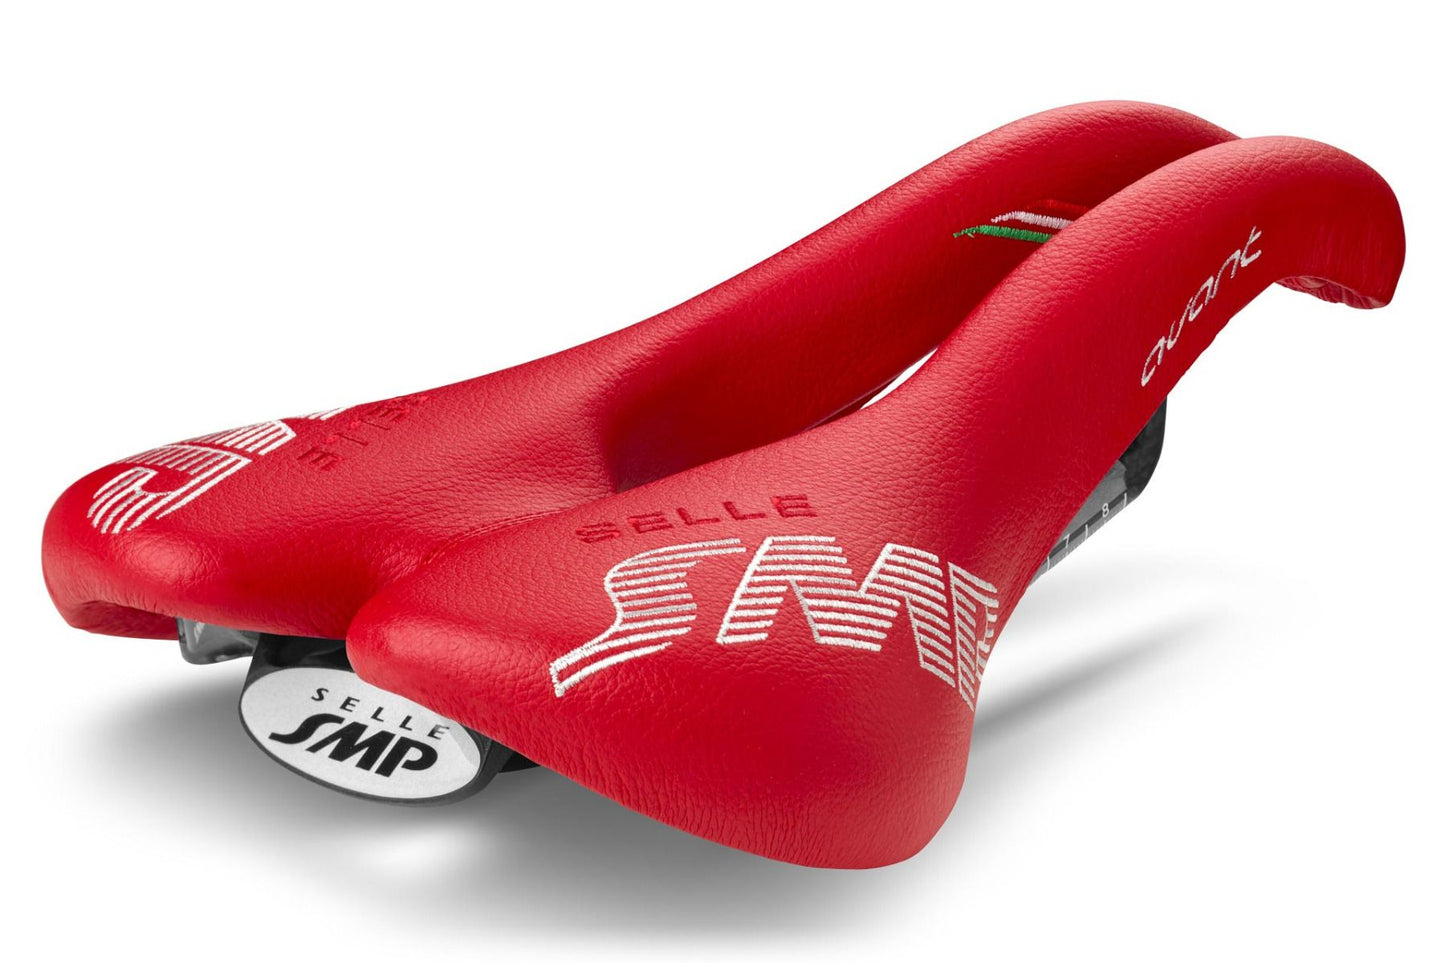 Selle SMP Avant Saddle with Carbon Rails (Red)